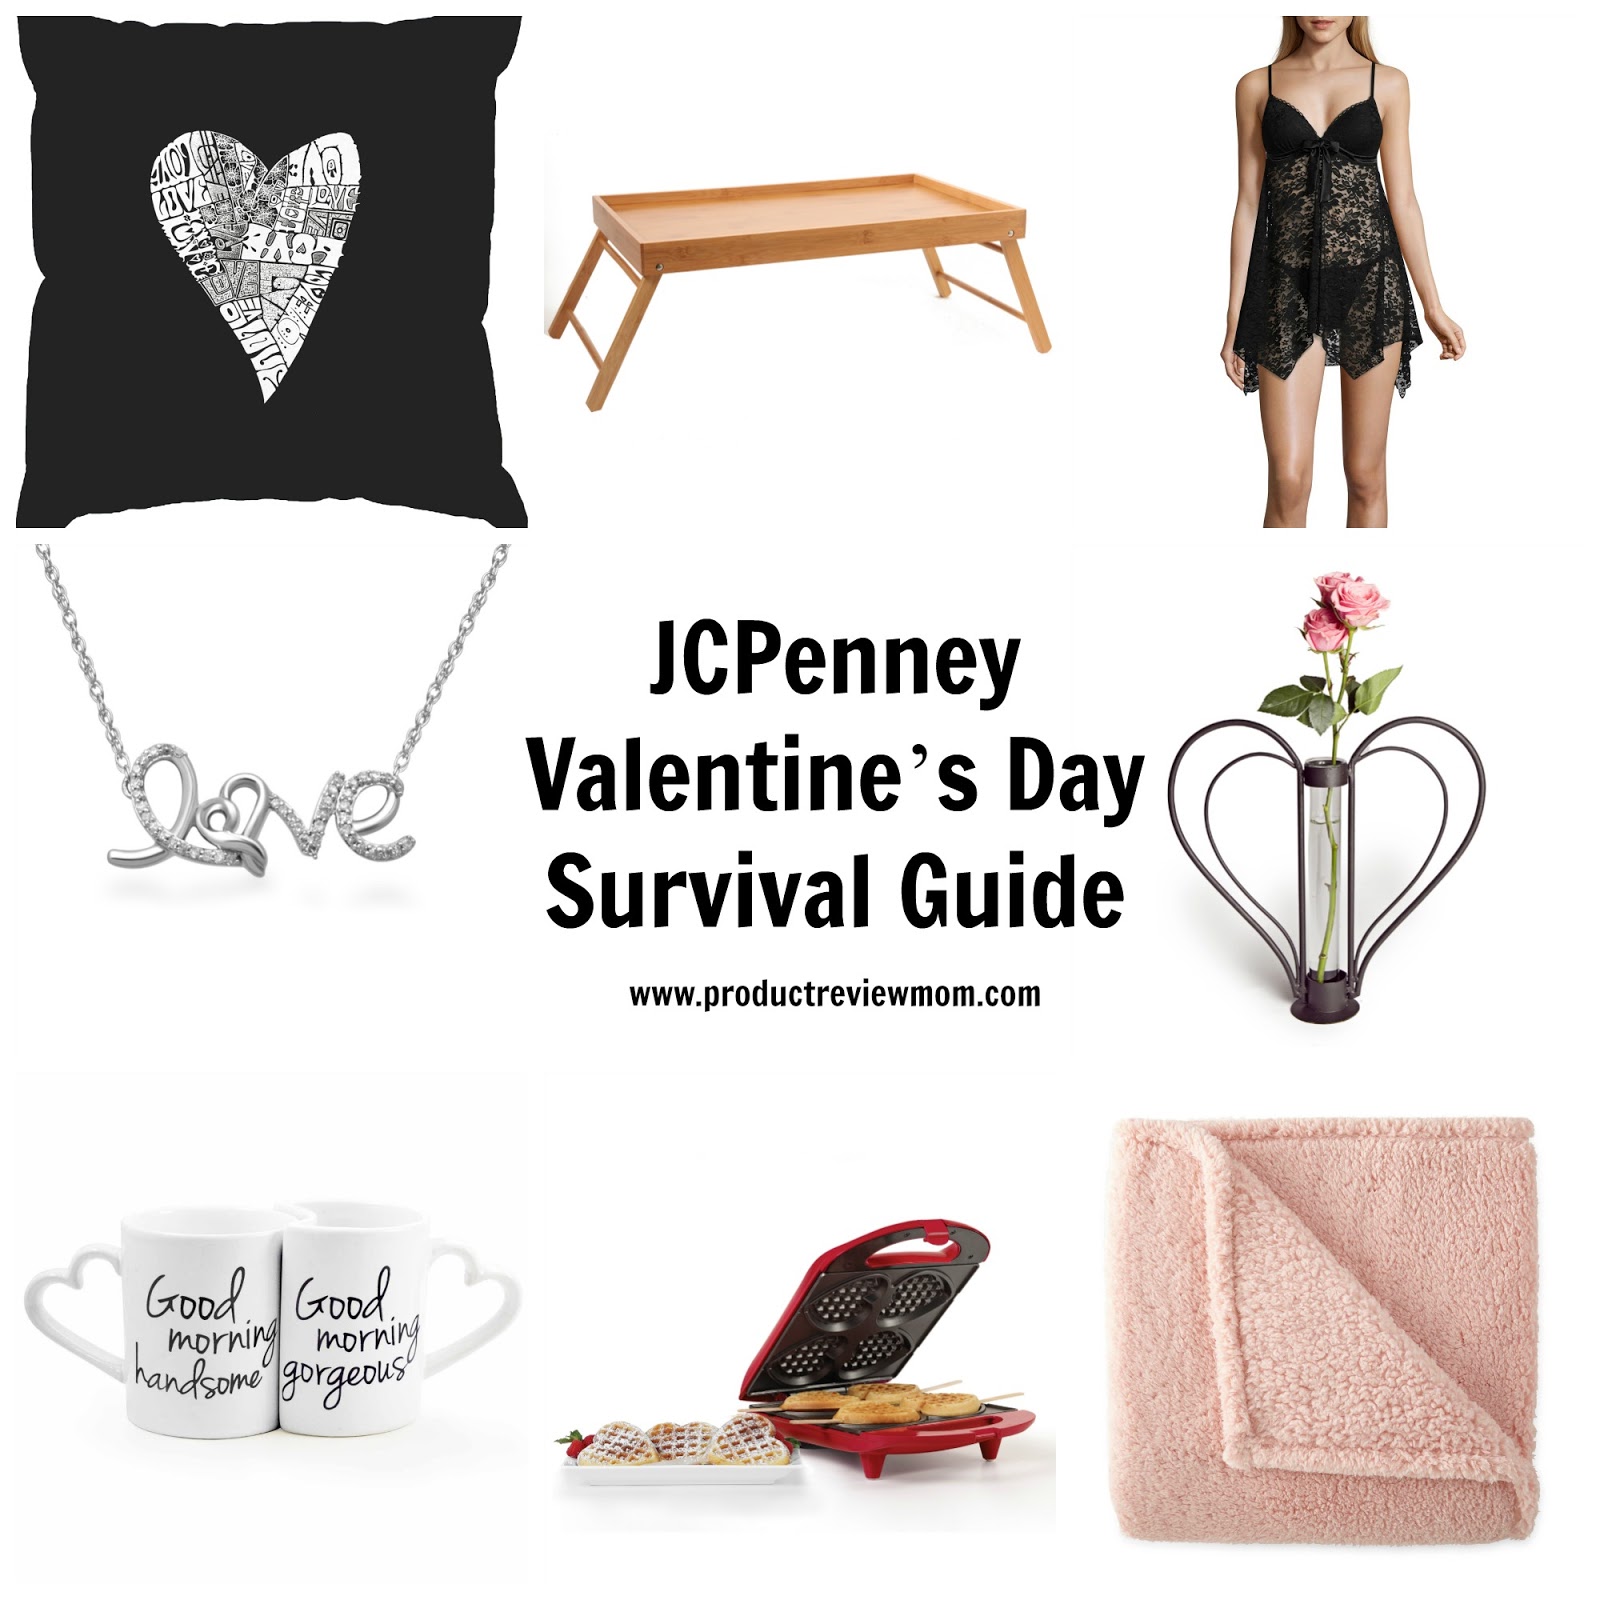 JCPenney Valentine’s Day Survival Guide  via  www.productreviewmom.com